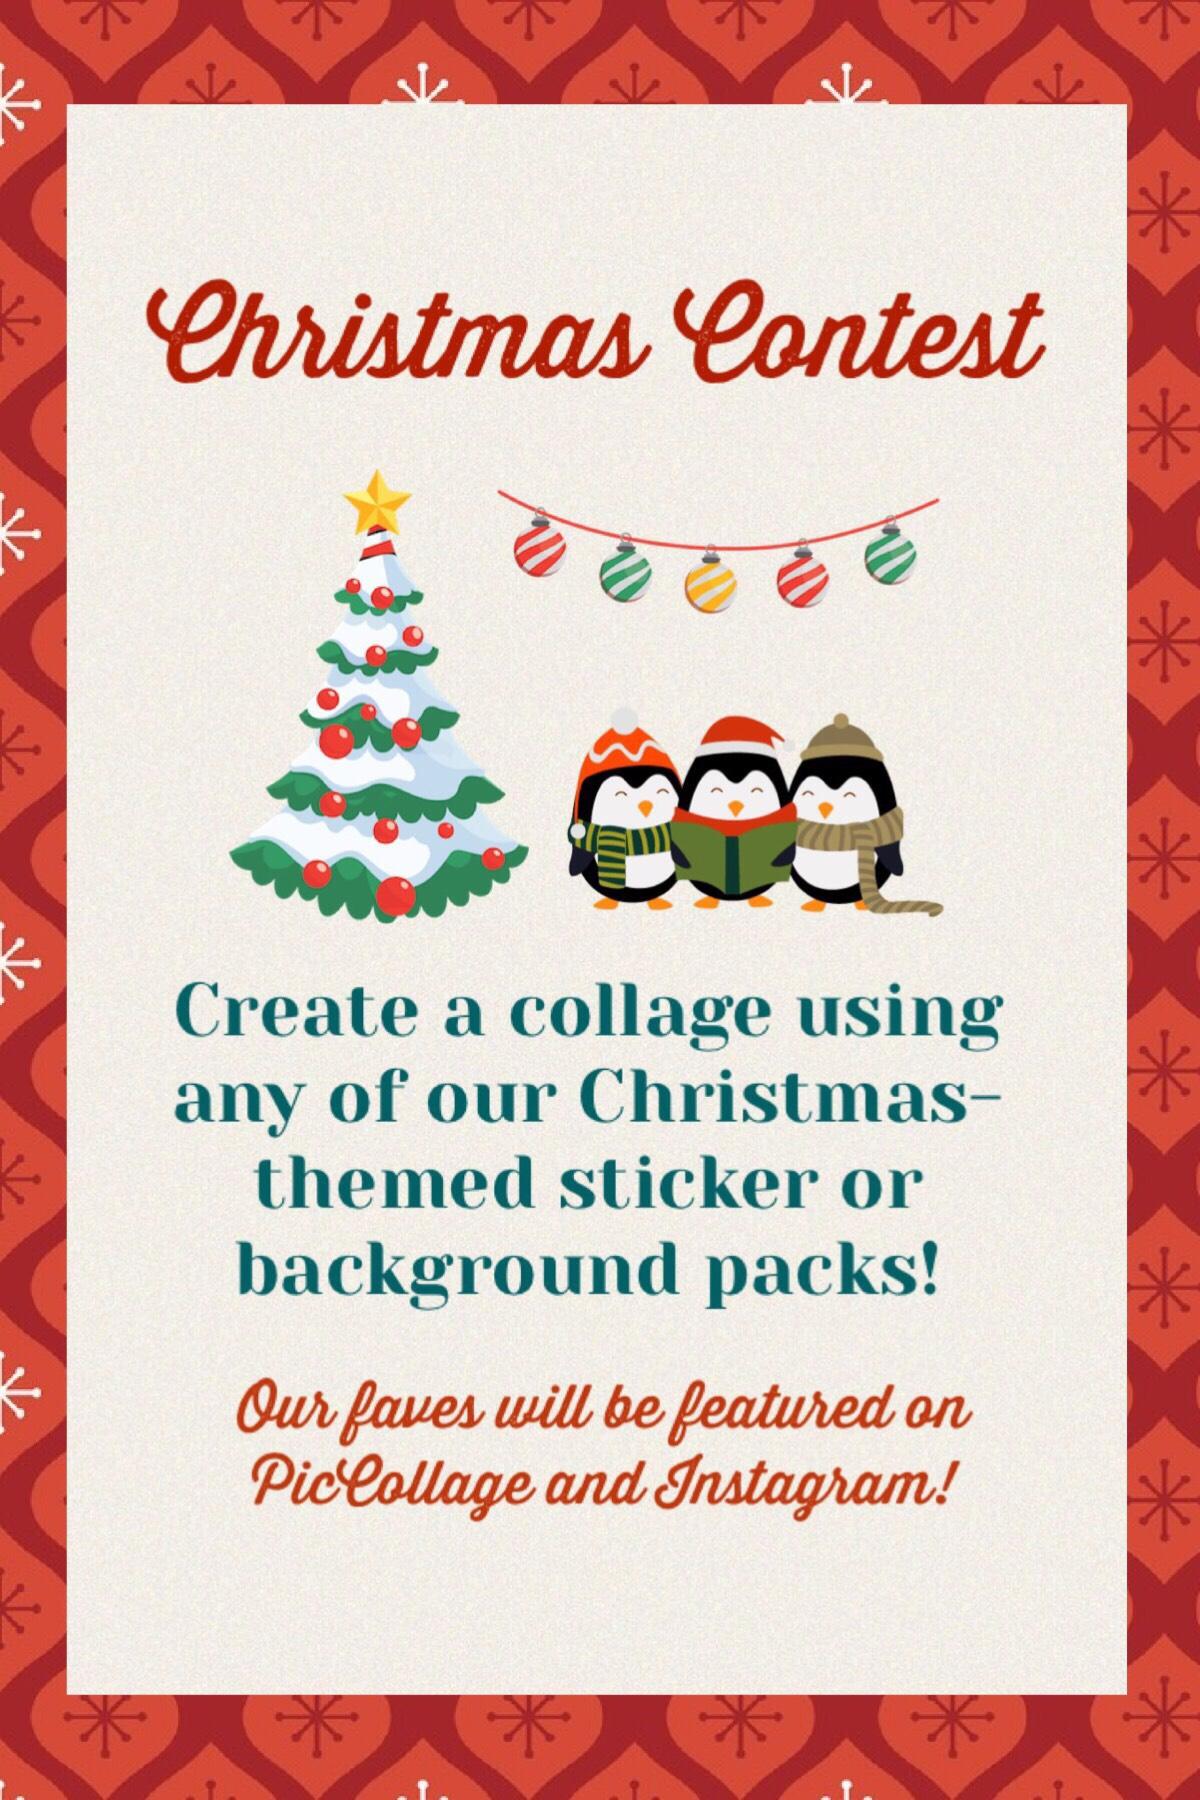 Check out our Christmas Contest! Deadline is December 27, 2018! 🎄